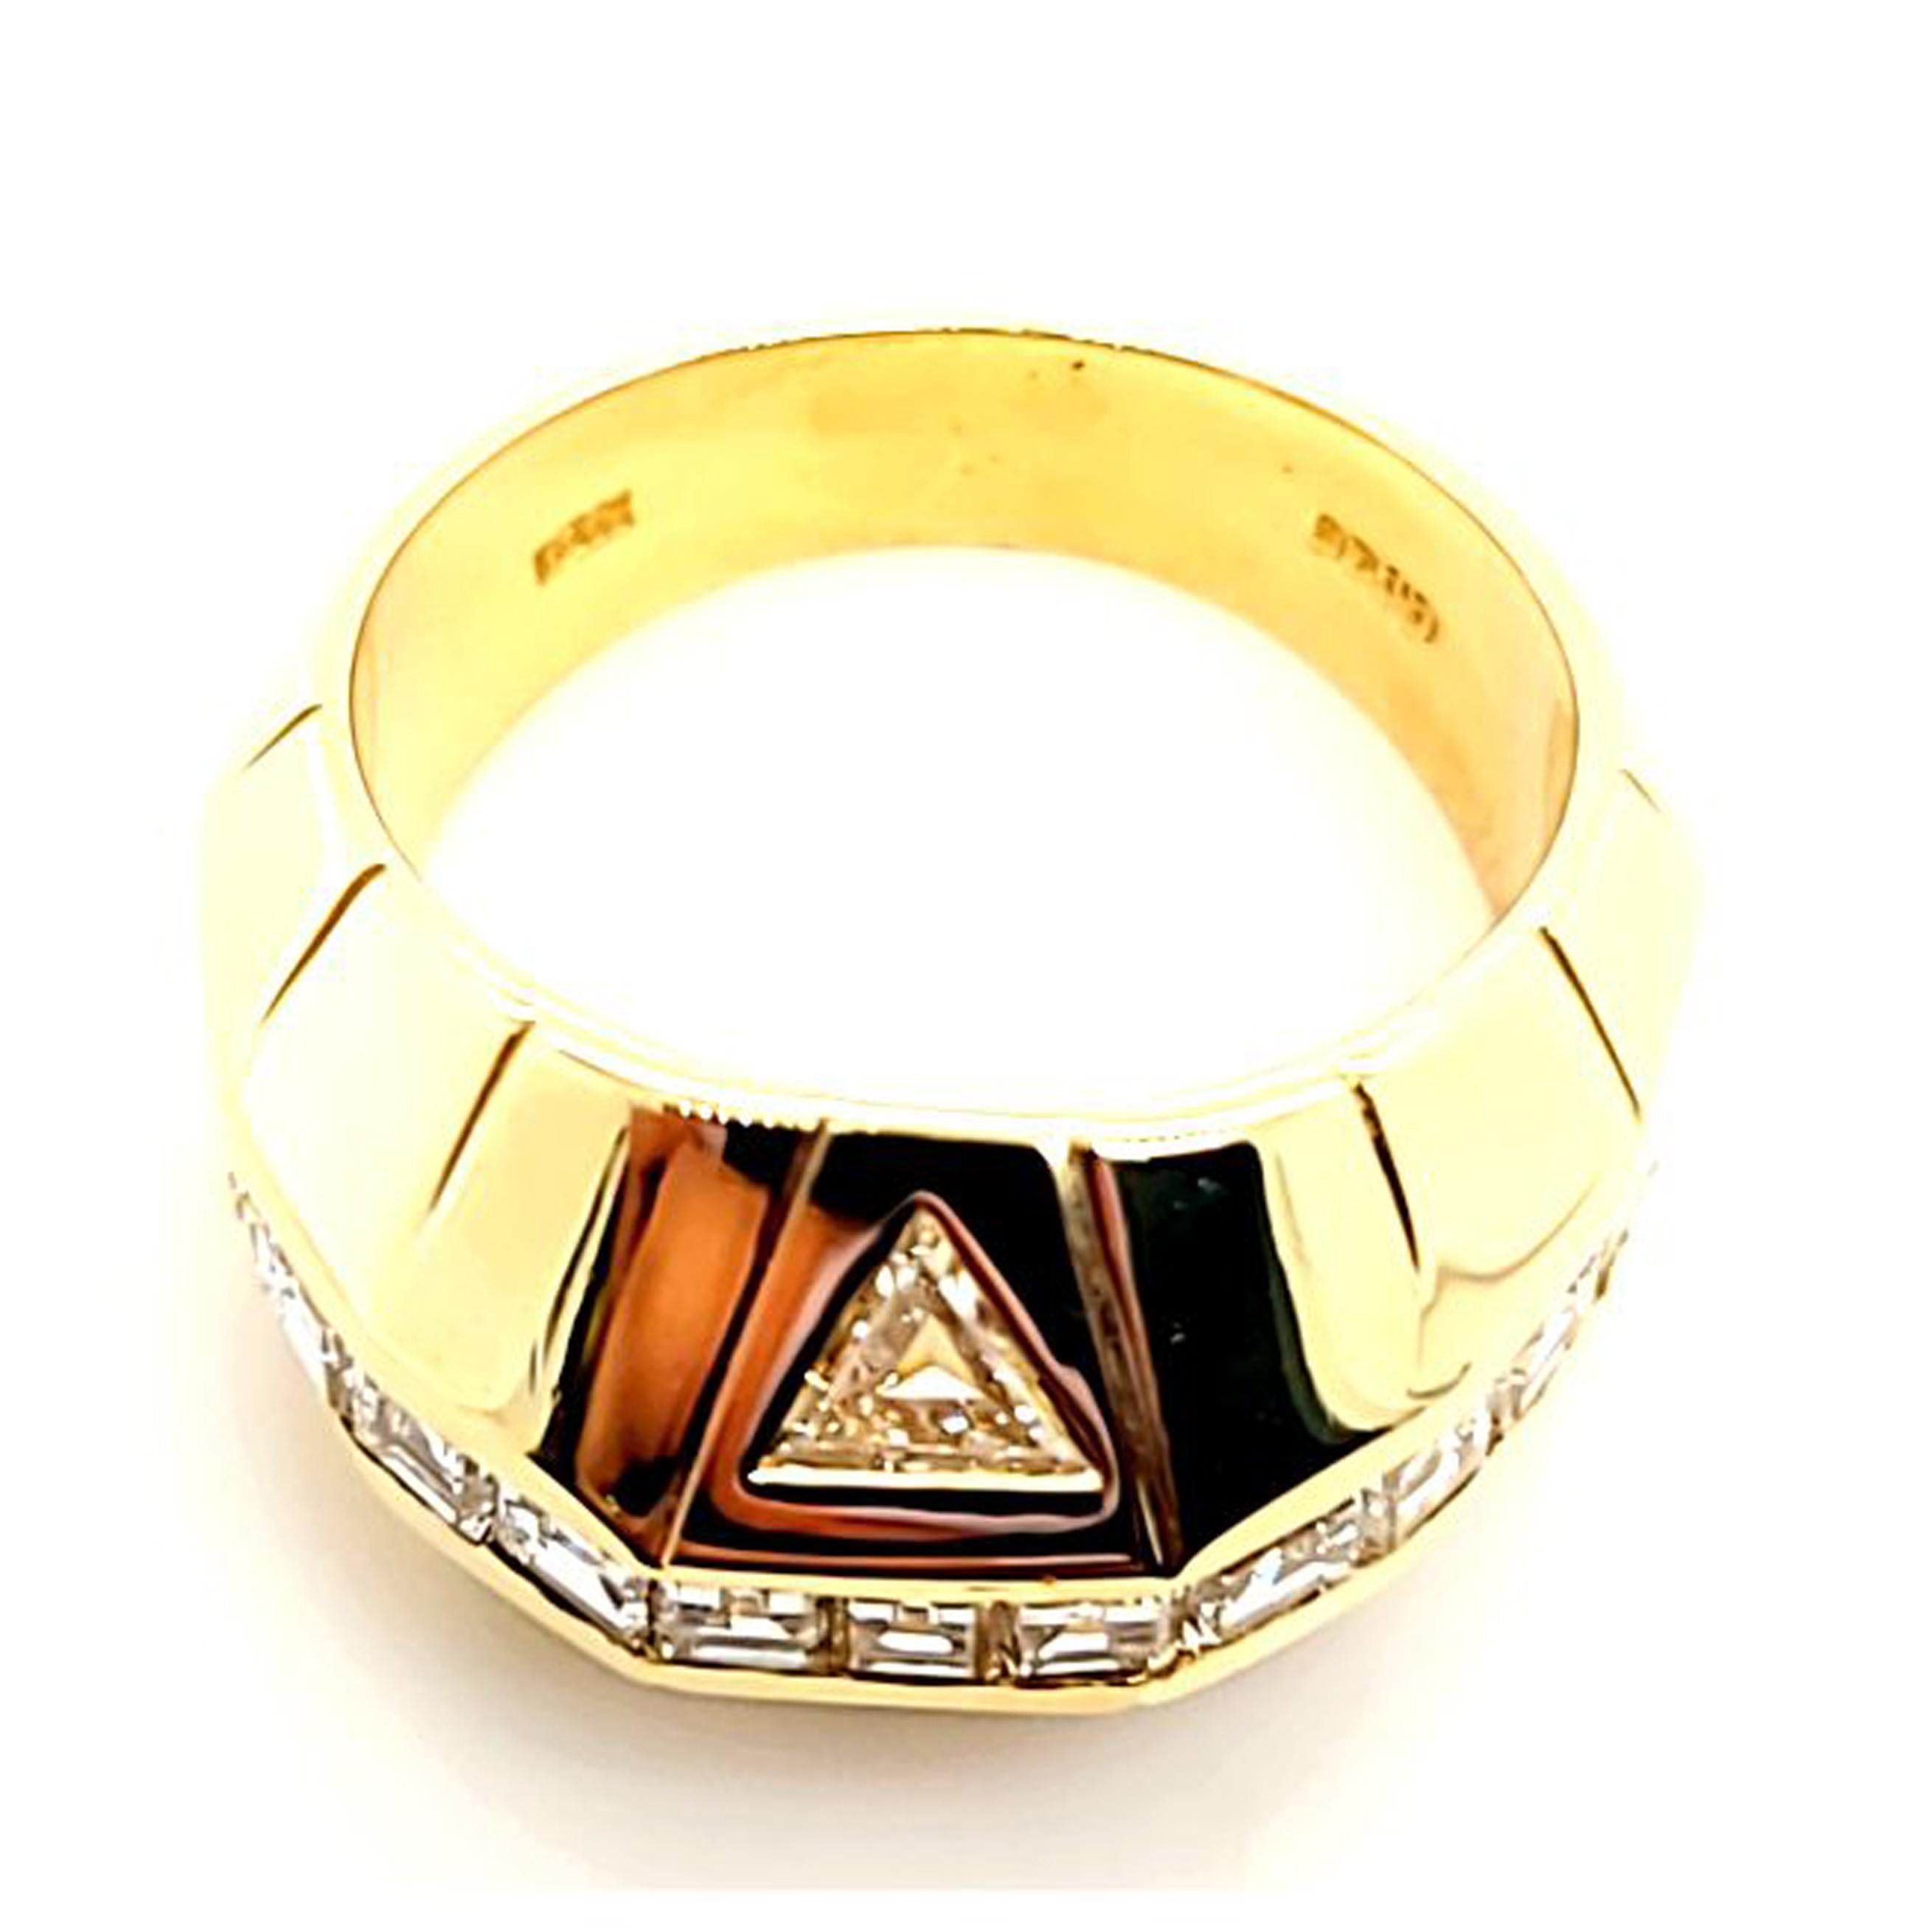 18 Karat Yellow Gold Men's Ring Featuring 15 Asscher and Trillant Cut Diamonds Of VS Clarity & G Color Totaling Approximately 2.00 Carats. Finger Size 9.5. Purchase Includes One Sizing Service, Upon Request. Finished Weight Is 18.2 Grams.